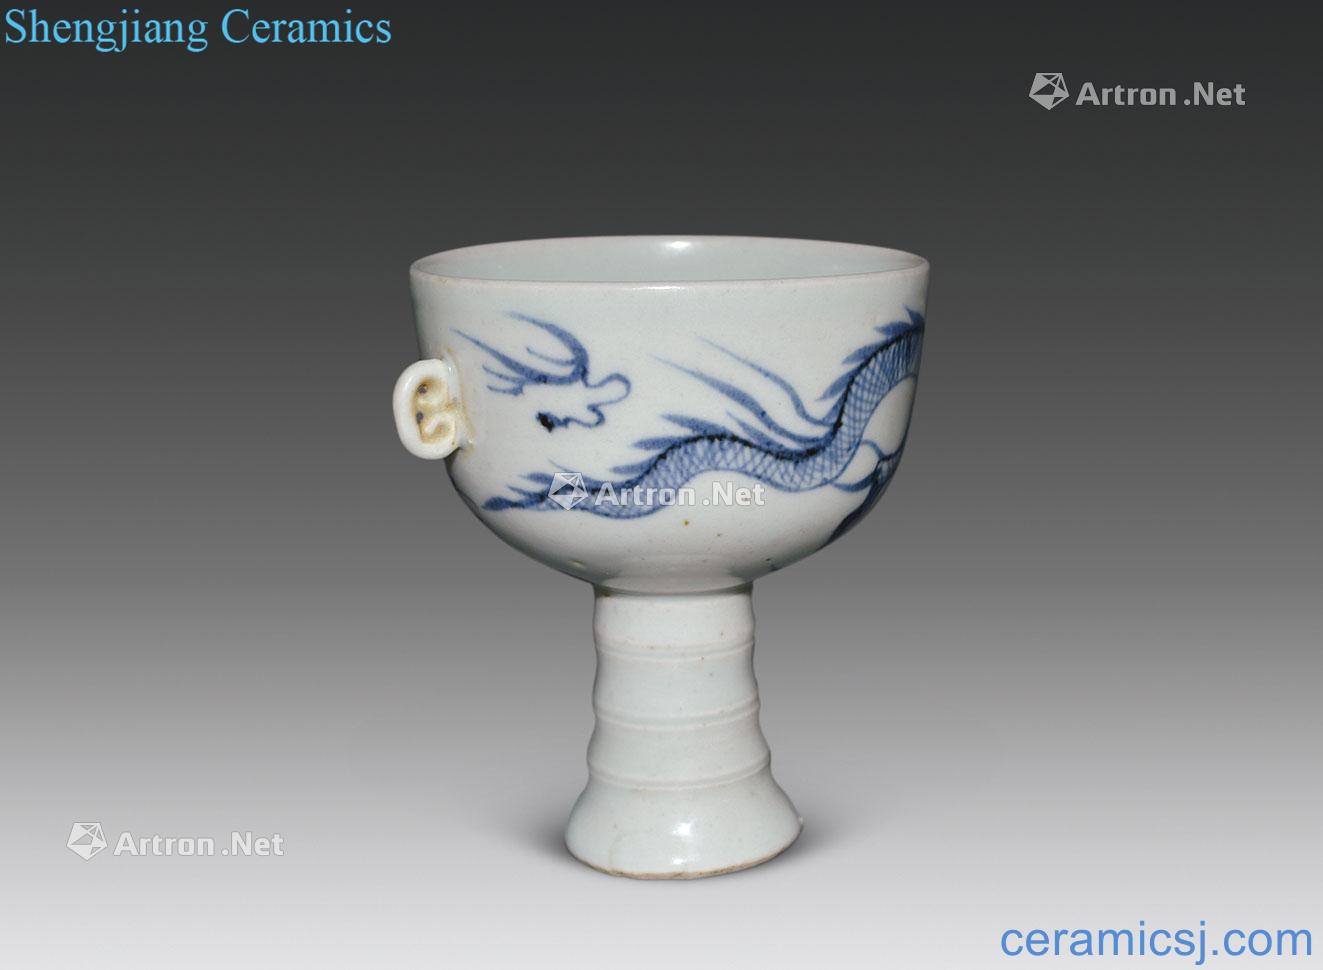 The yuan dynasty Blue and white dragon monaural footed cup